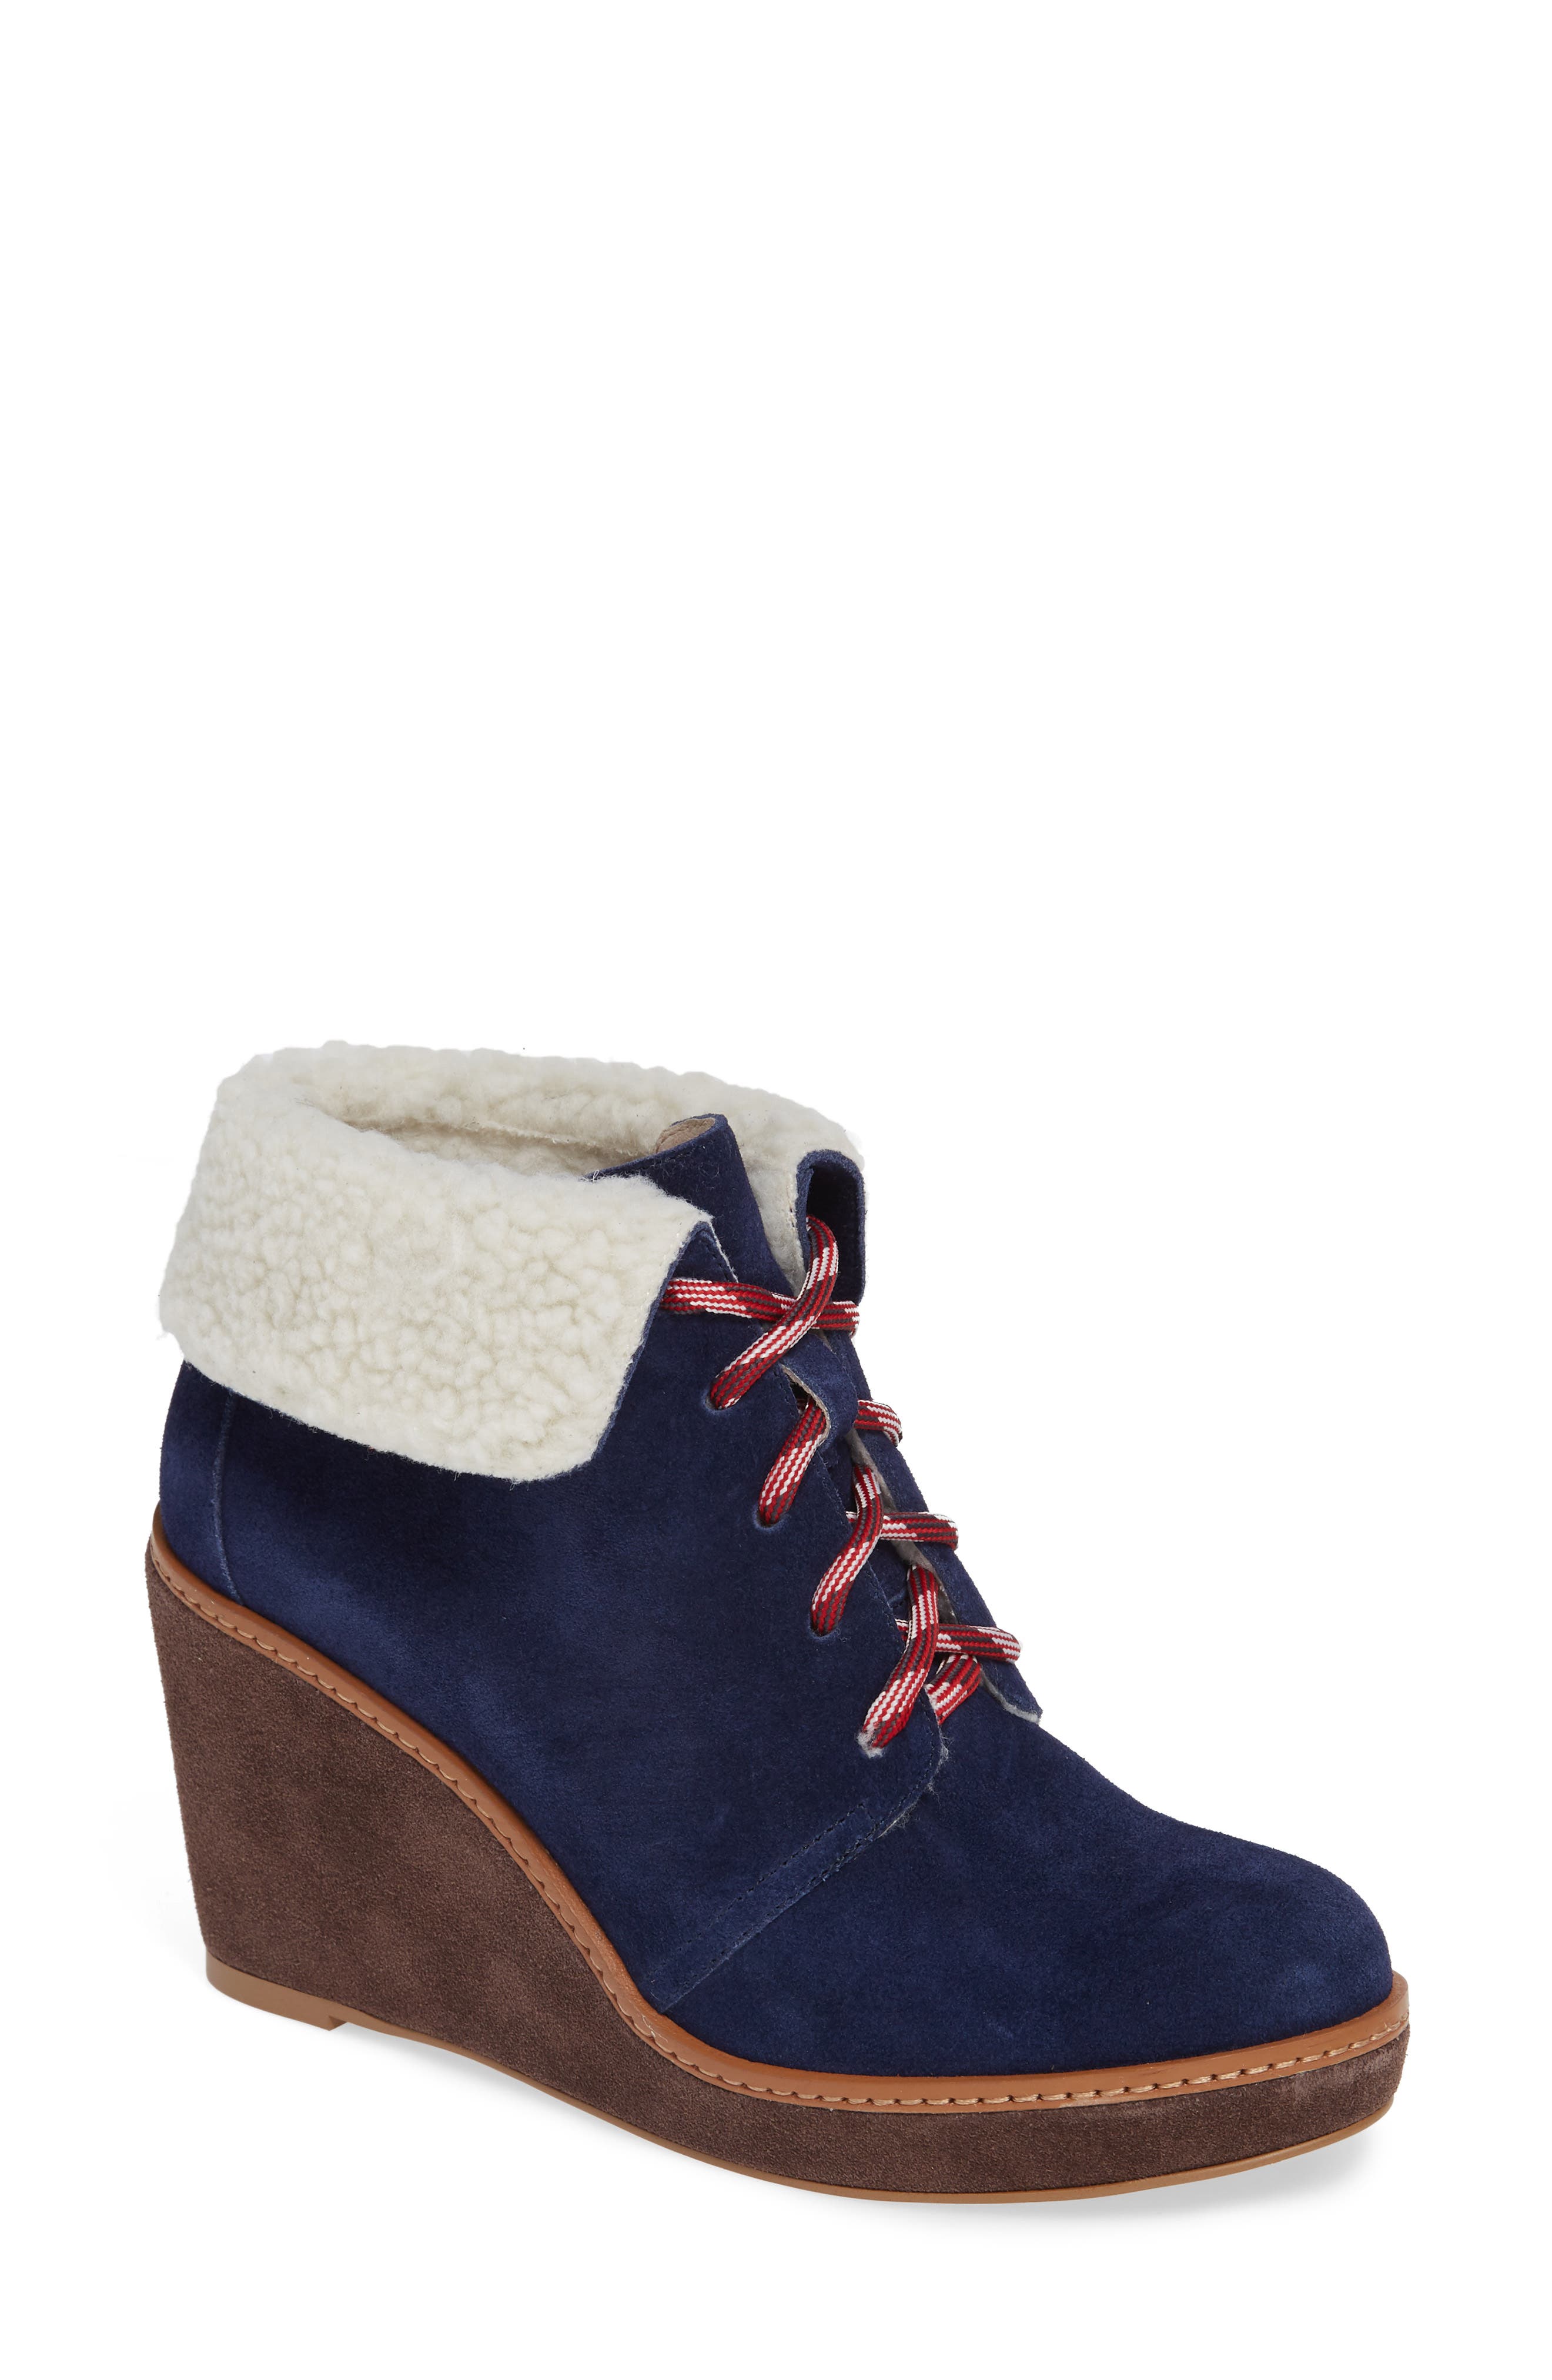 knotty derby boots